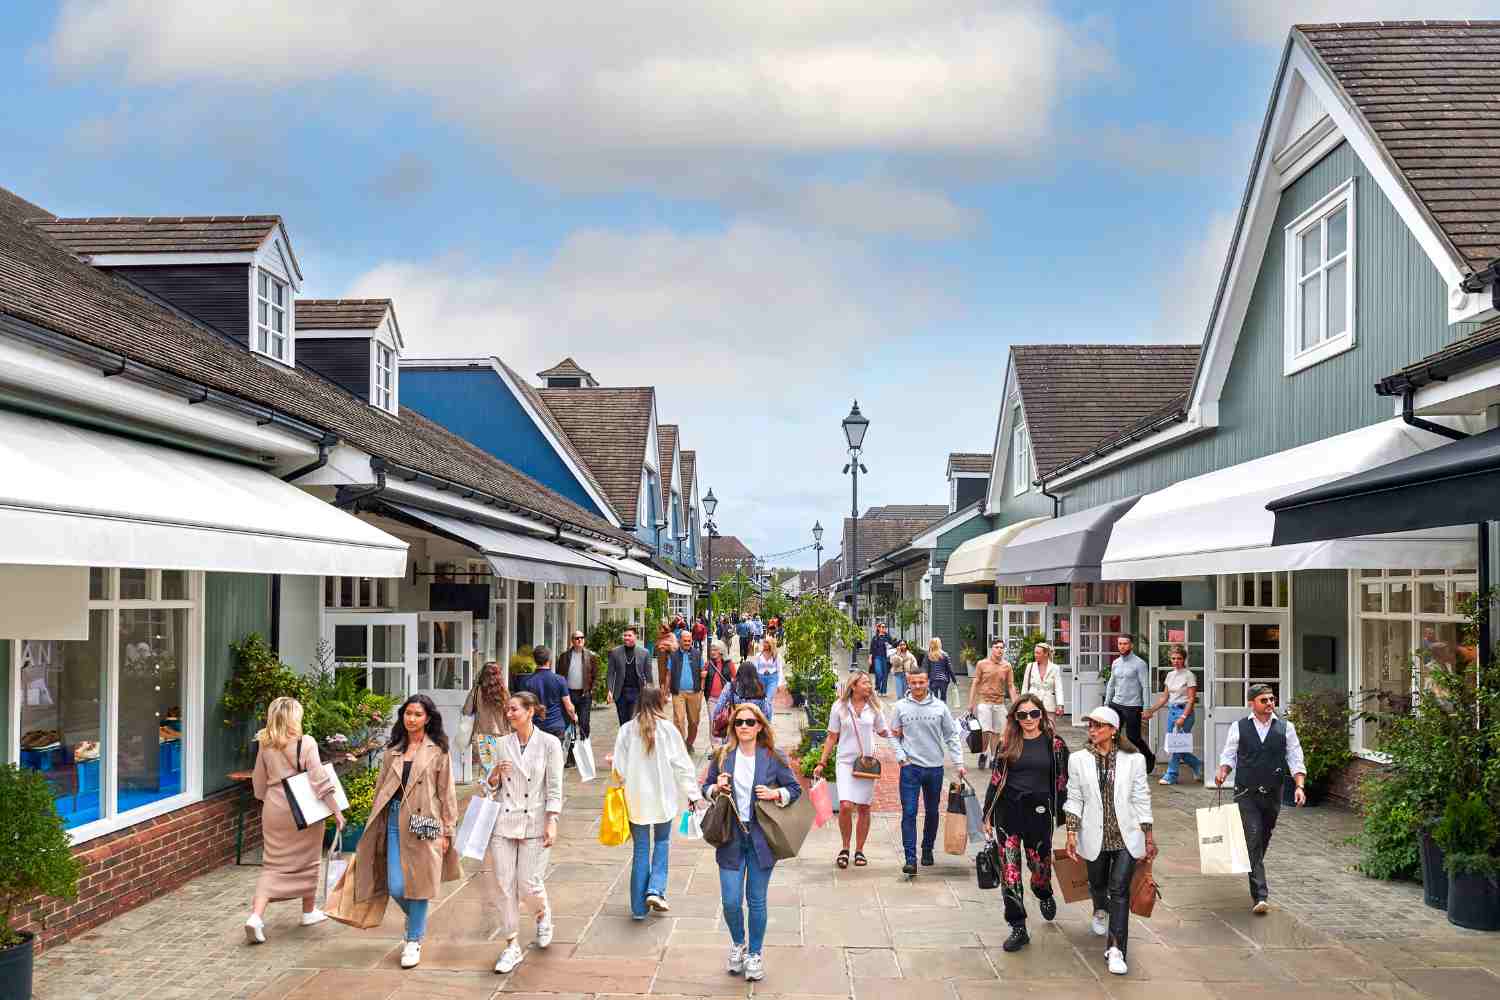 Win a VIP shopping day at Bicester Village with Muddy Stilettos